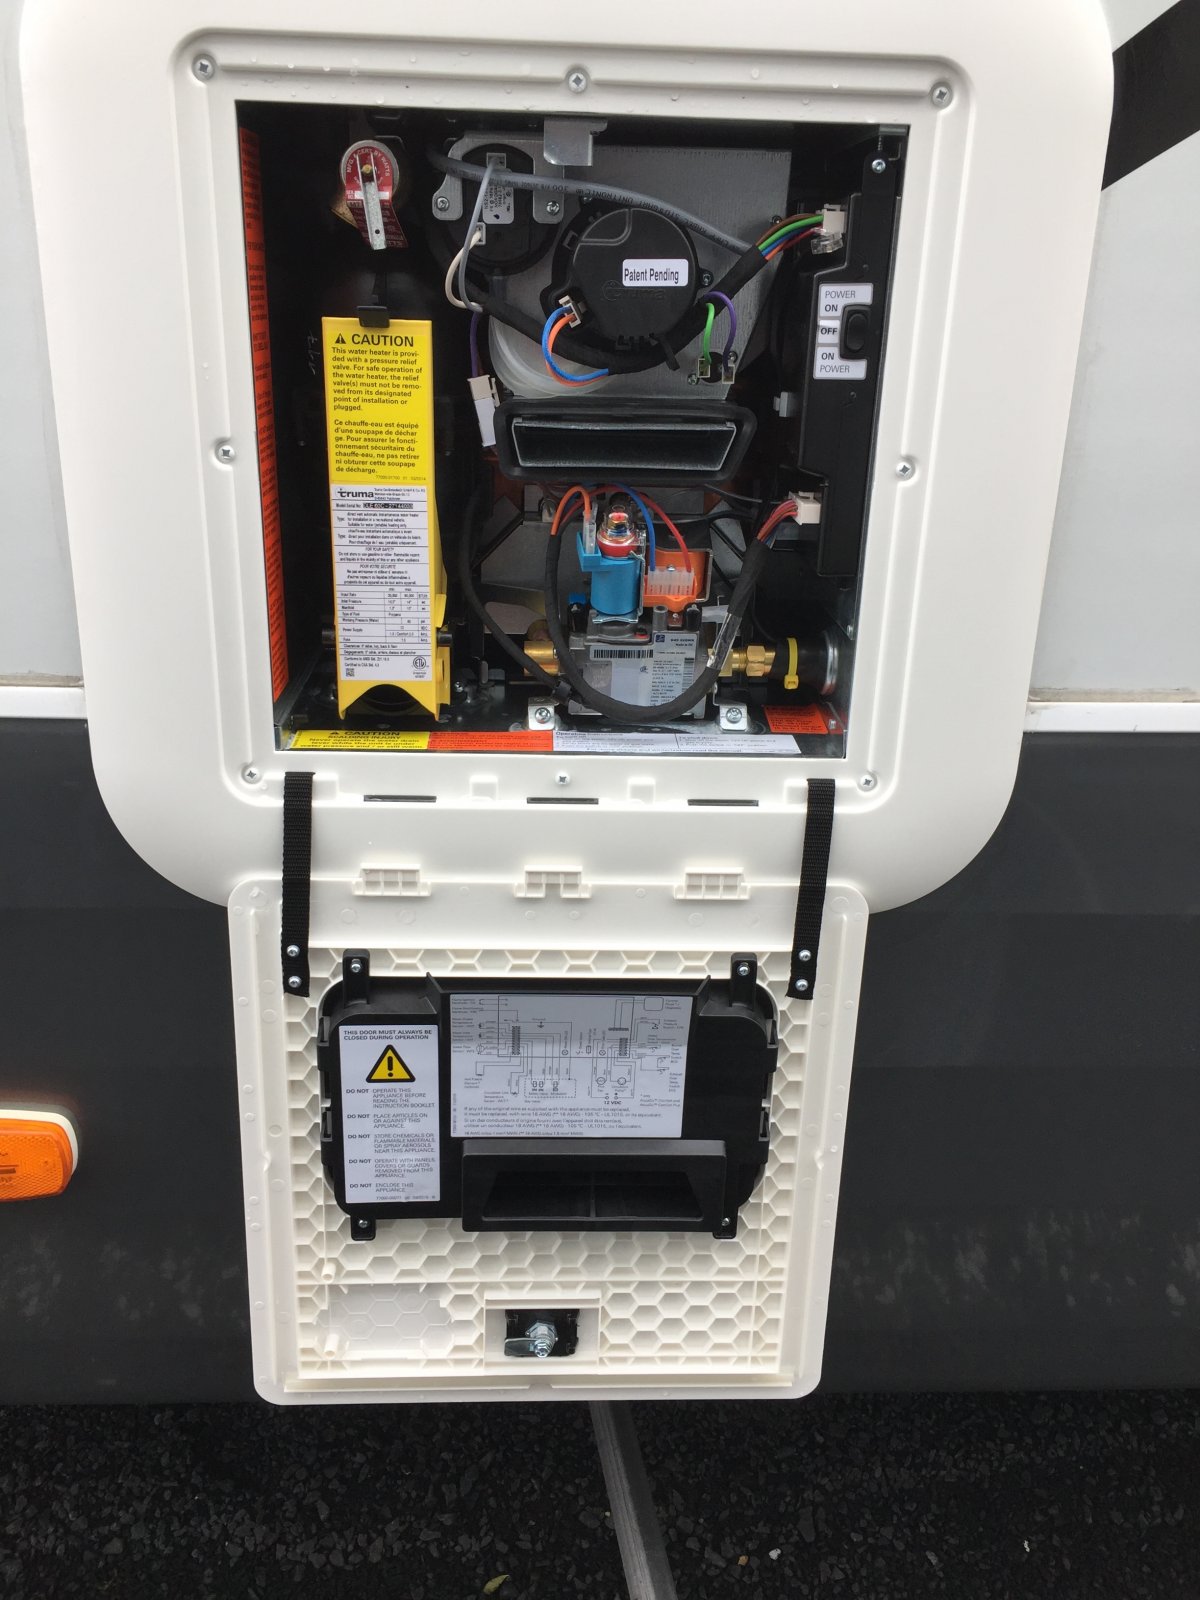 Wiring Diagram For 2016 Rv Water Heater from www.doityourselfrv.com